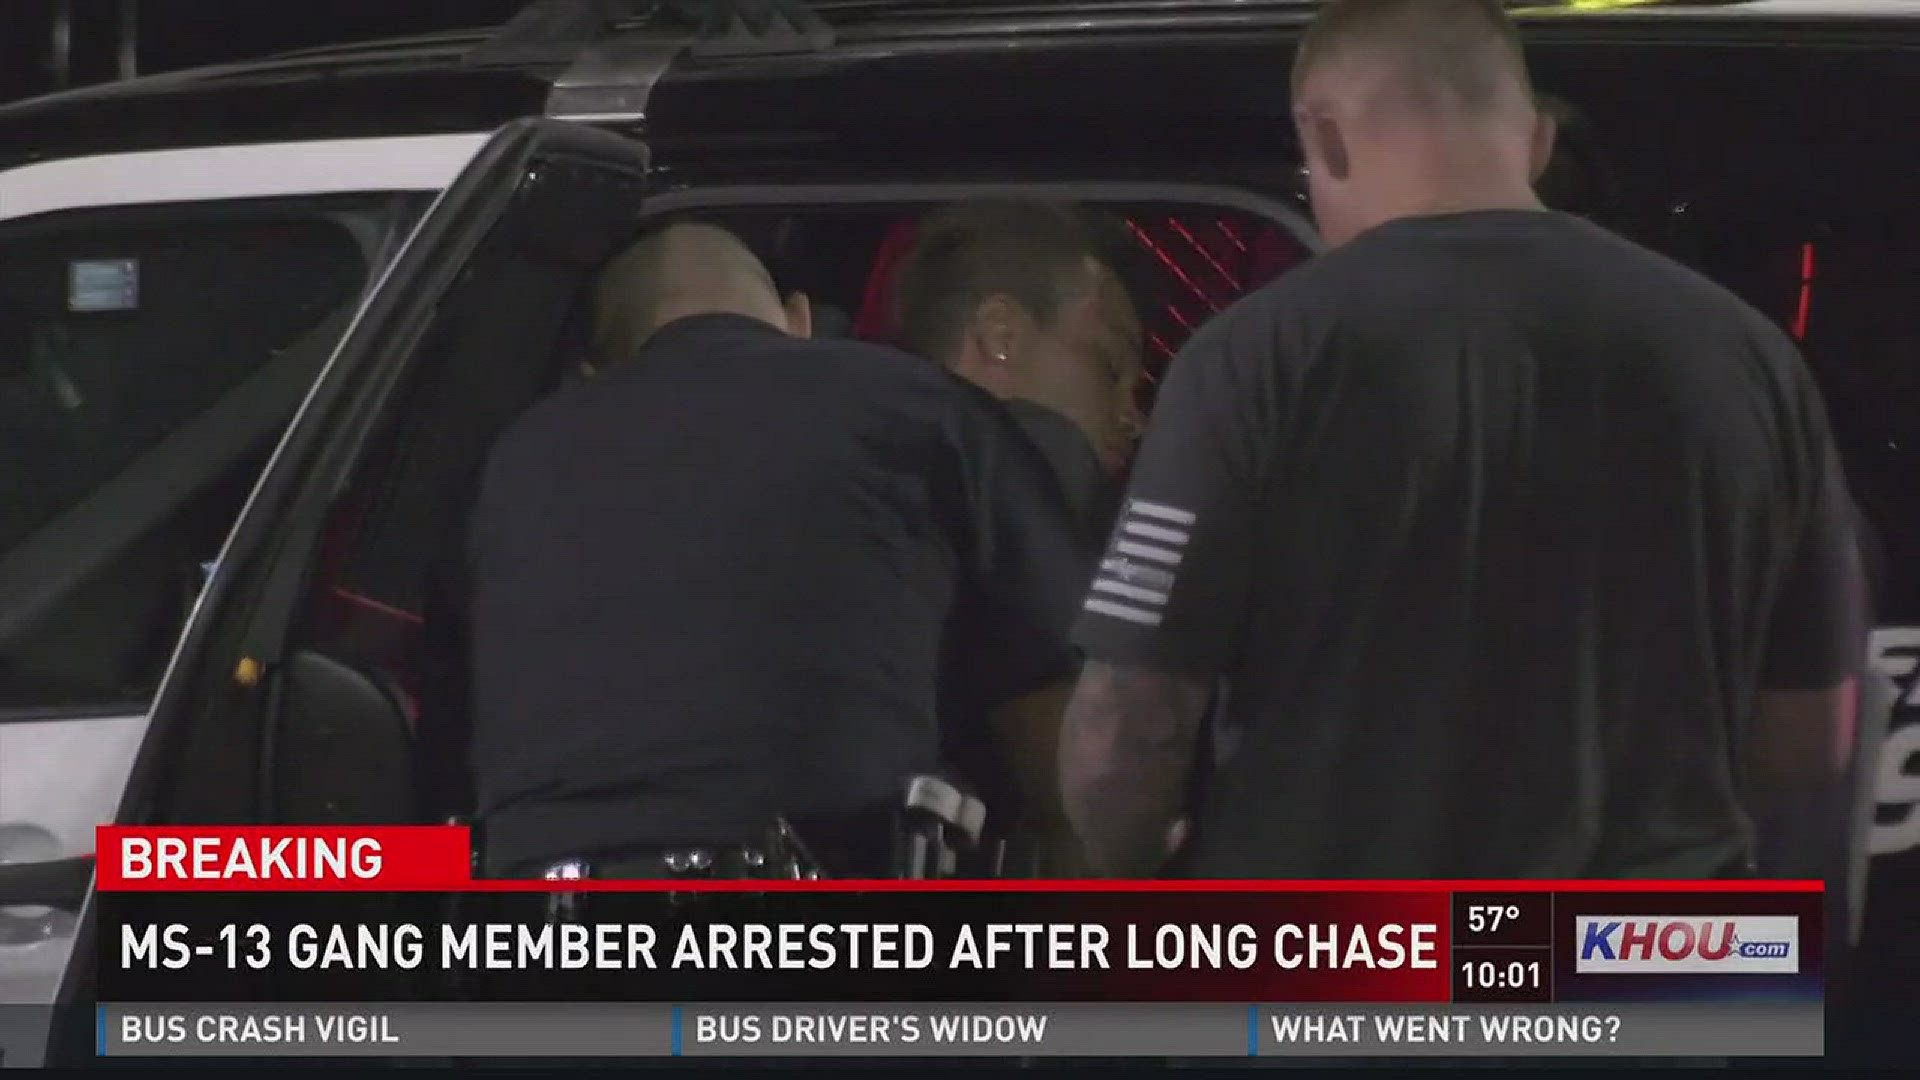 A MS-13 gang member is in custody after kidnapping a 14-year-old and leading a police on a long, high-speed chase.